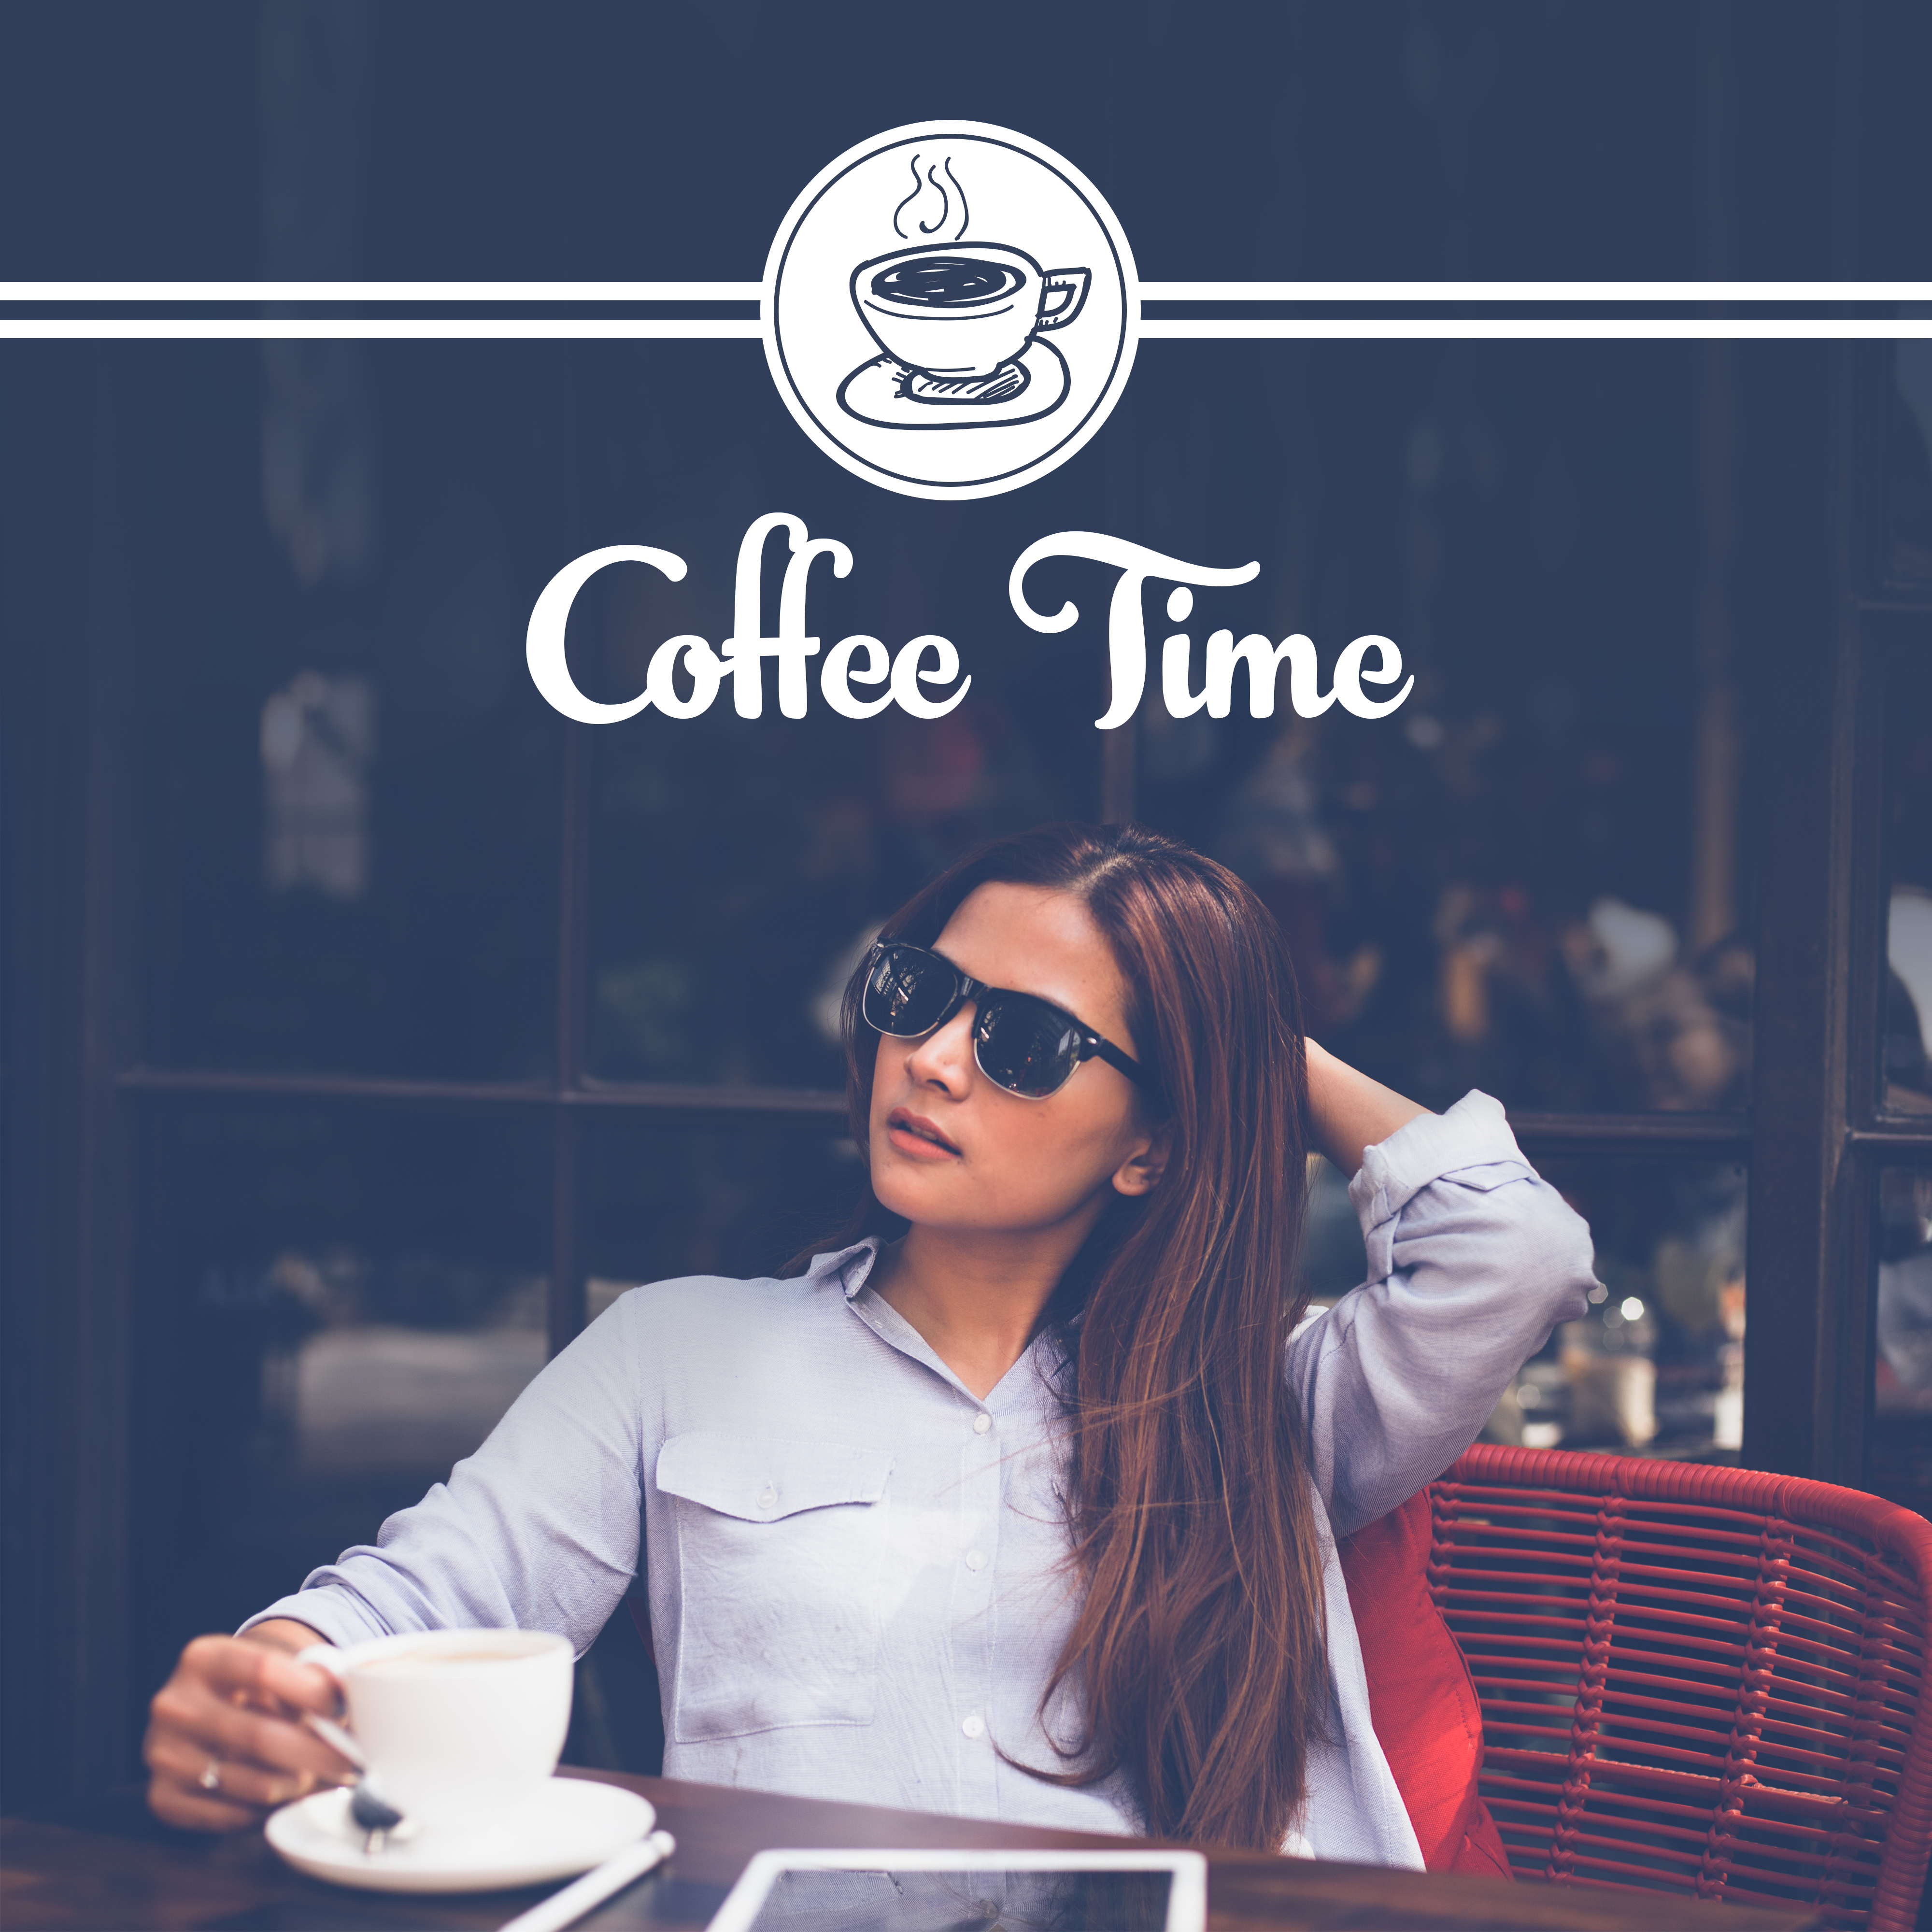 Coffee Time – Rest with Friends, Jazz Cafe, Chillout, Instrumental Songs for Relaxation, Gentle Piano, Calming Music to Rest